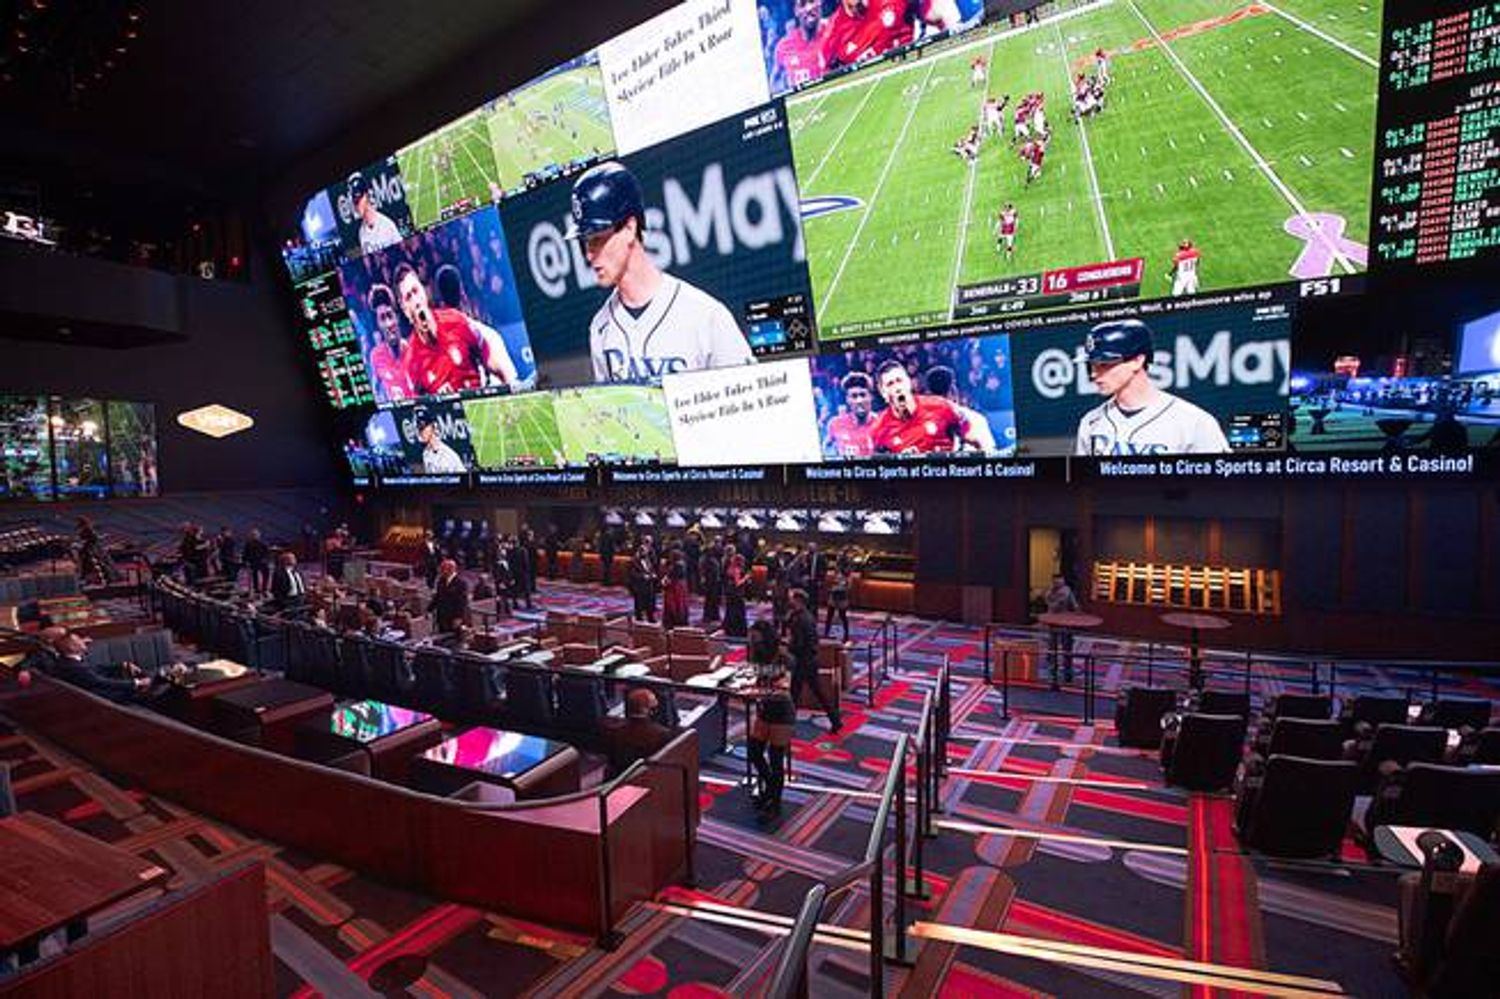 Sports bar equipped with an expansive 4K P125 LED video wall